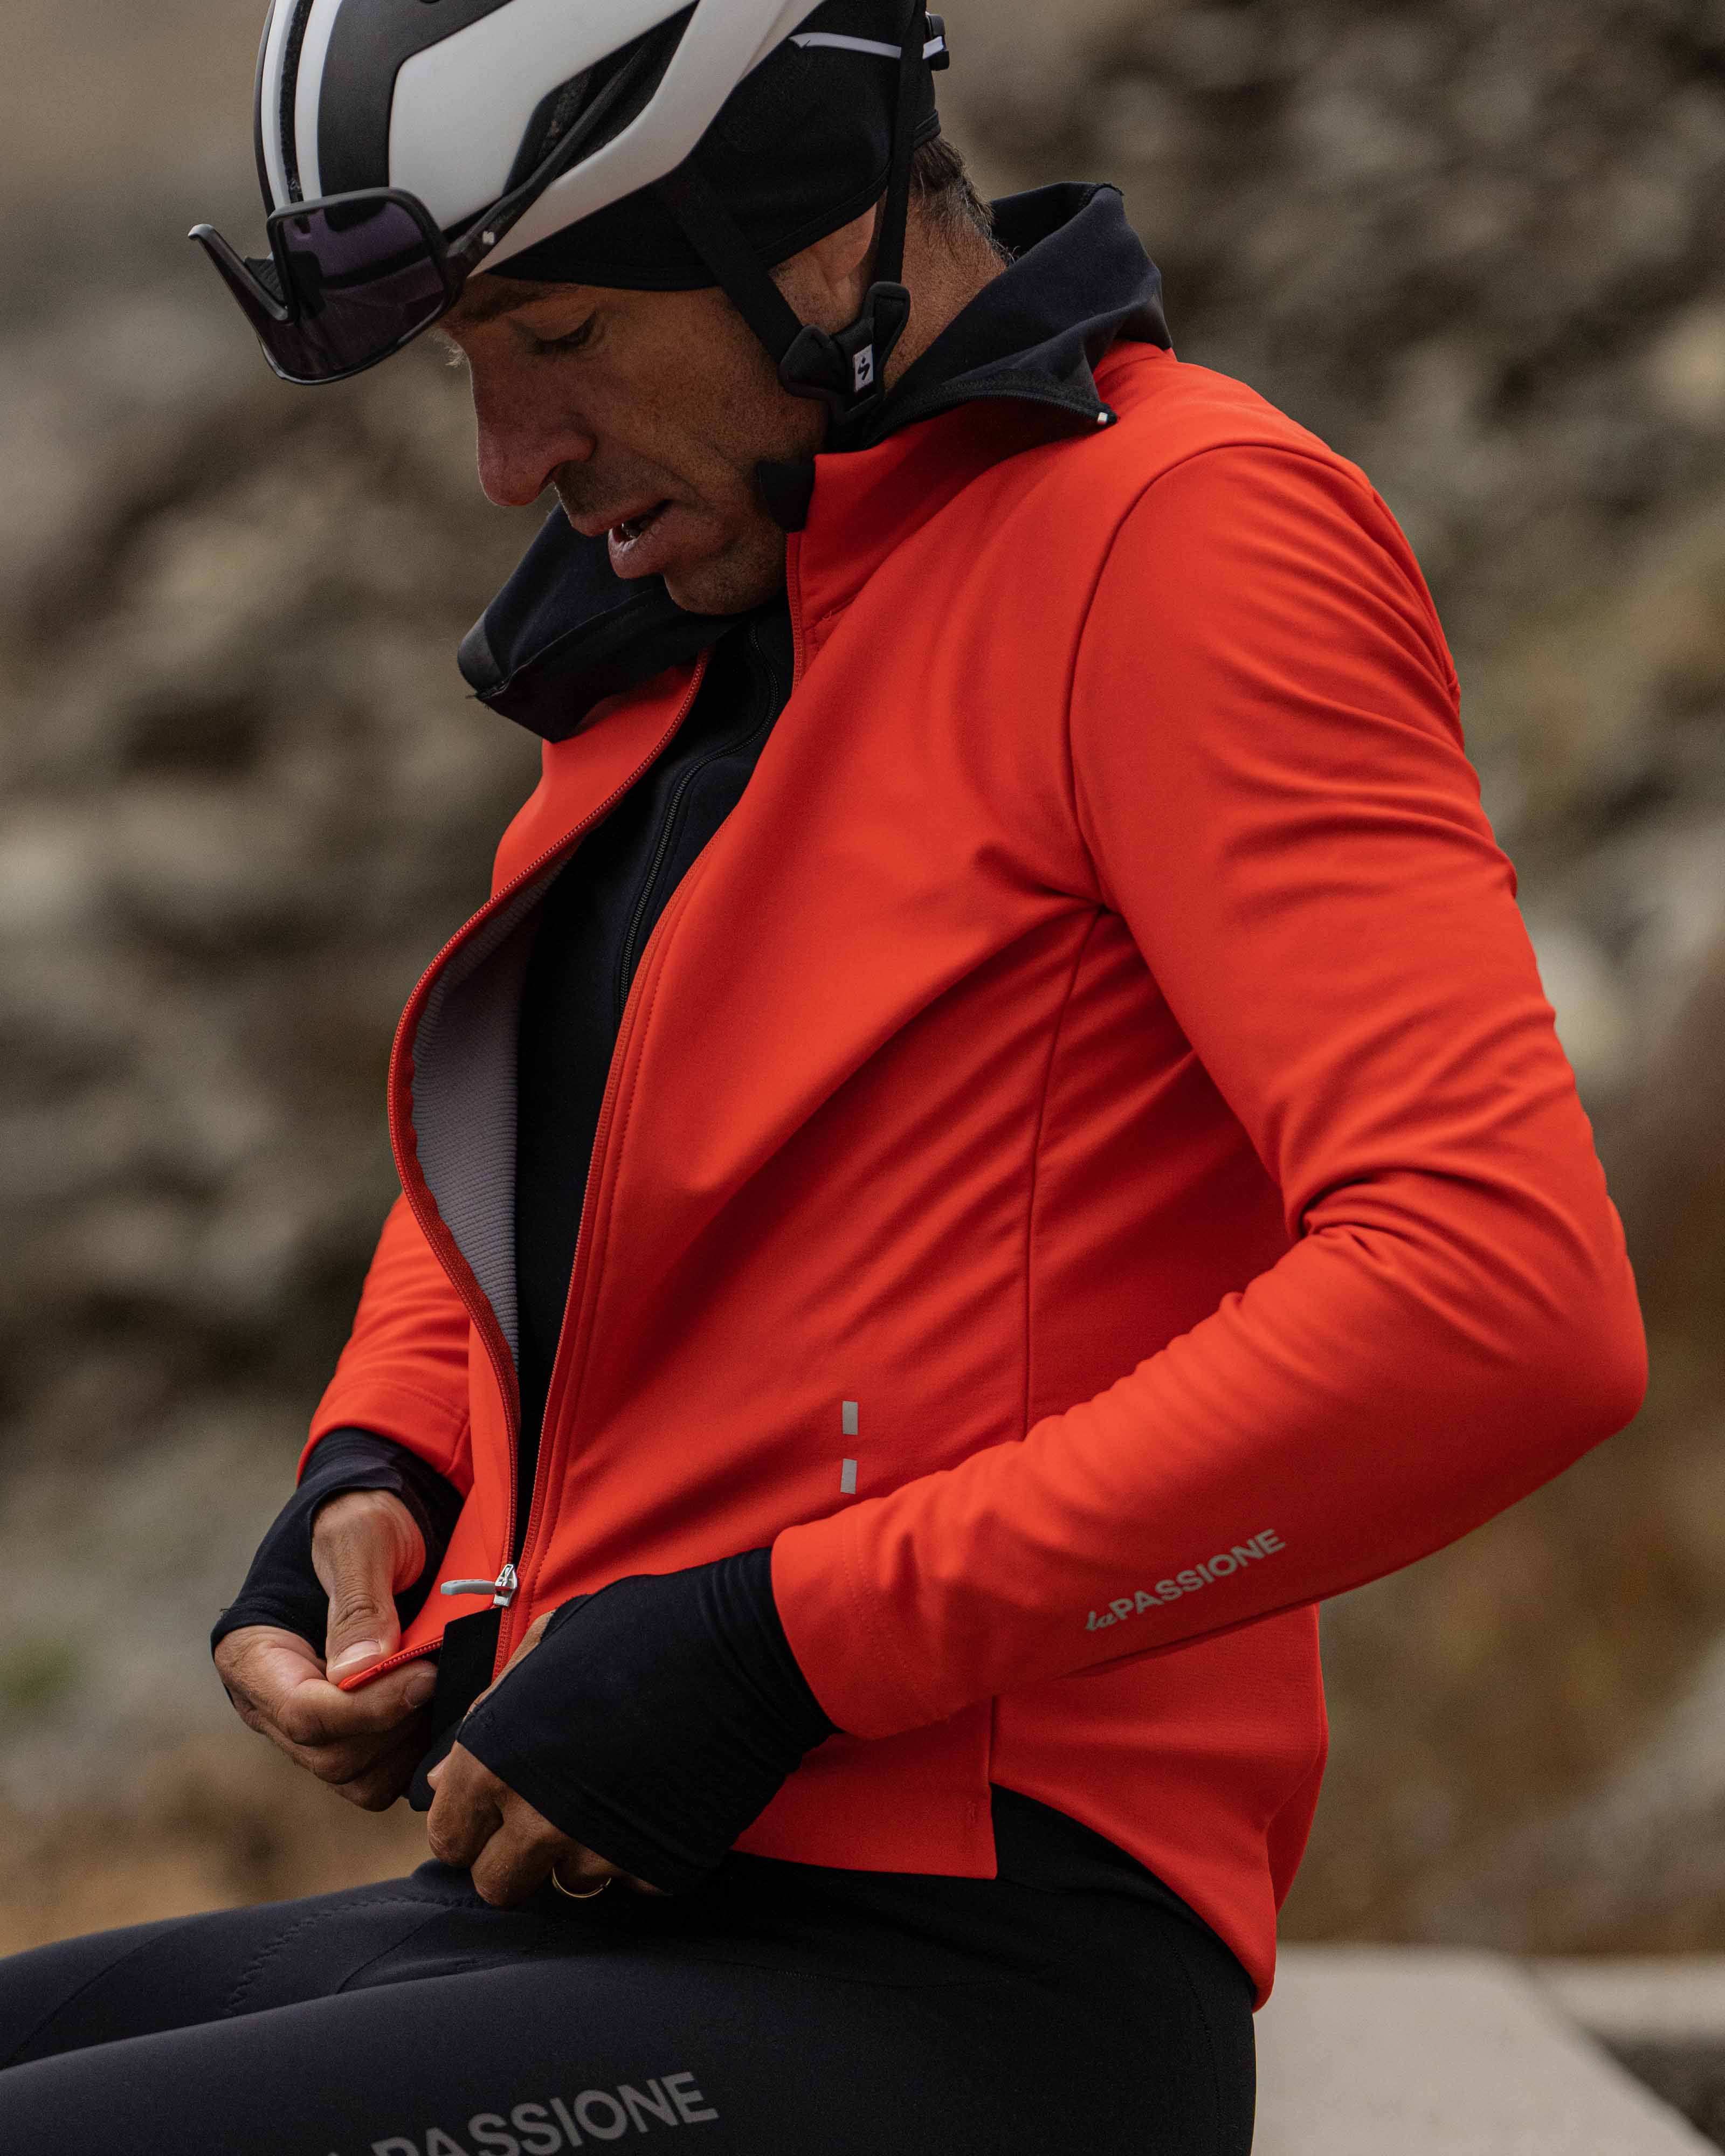 Jackets | La Passione Cycling Clothing – La Passione Cycling Couture